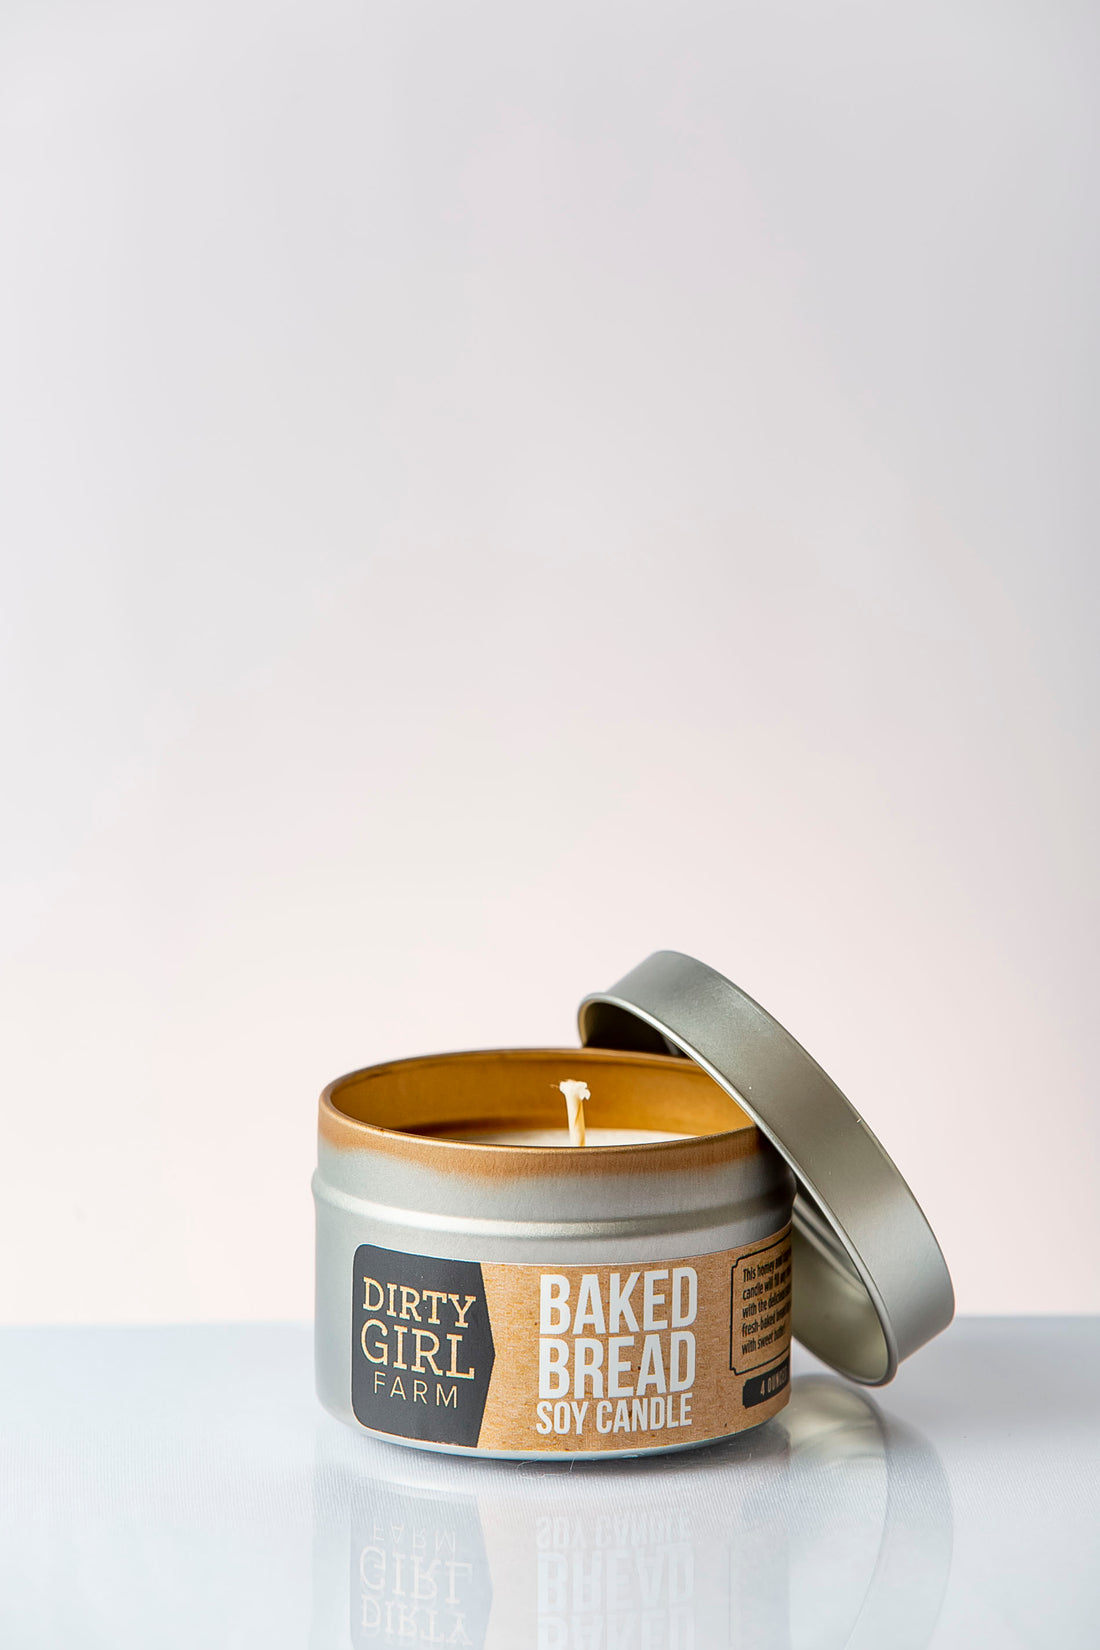 Baked Bread Soy Candle